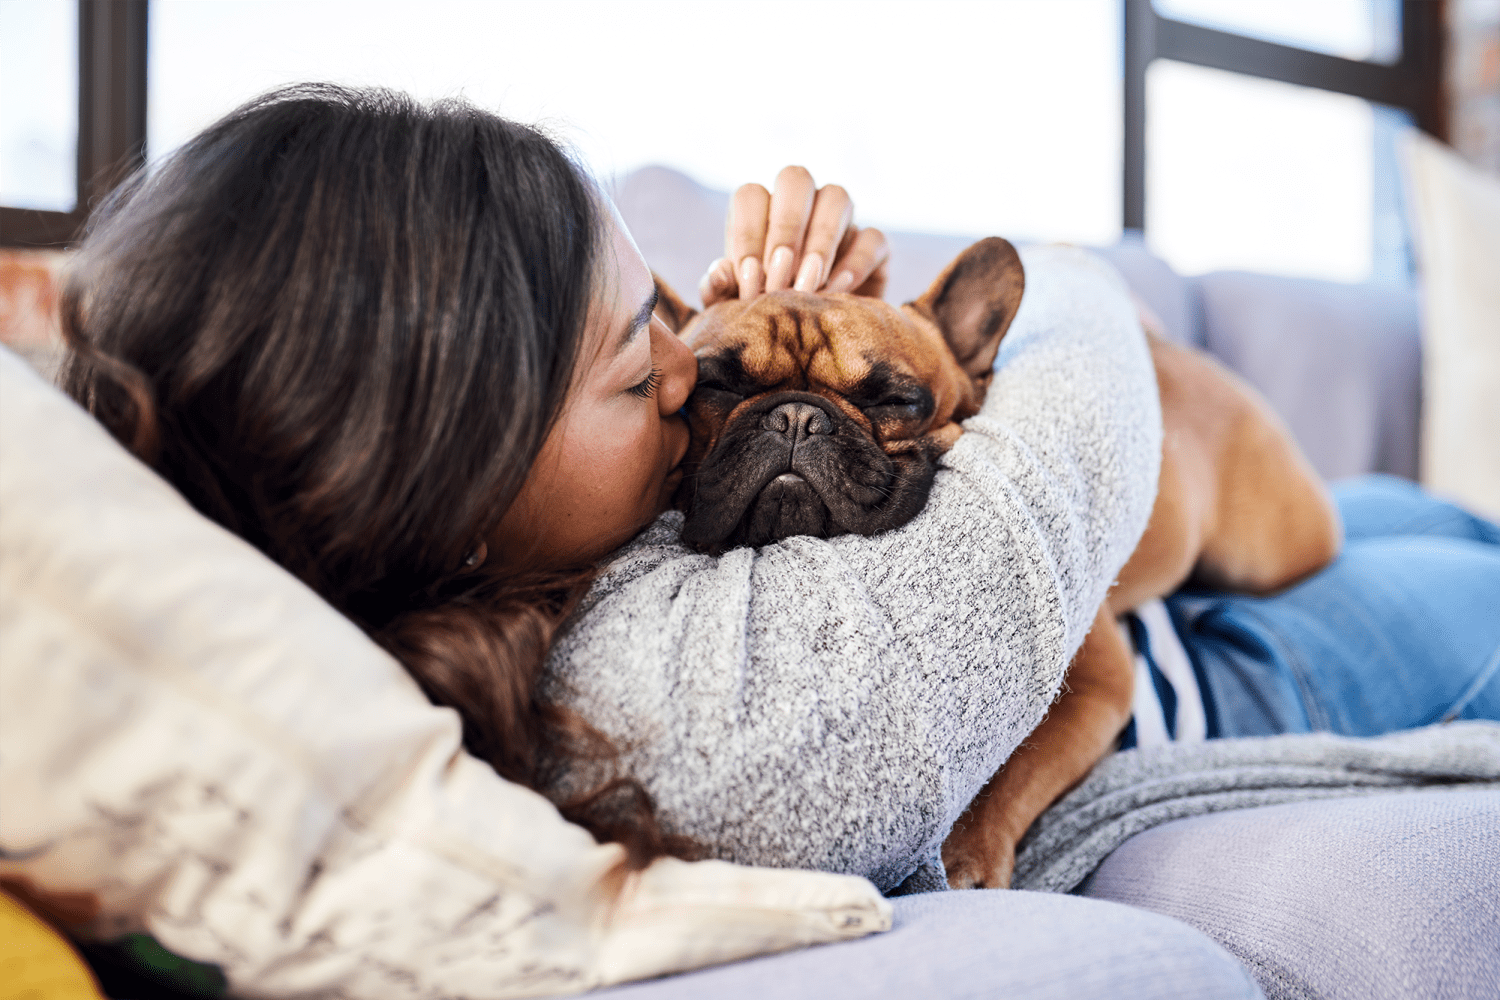 Resident snuggling with her French bulldog in their pet-friendly home at Nieuw Amsterdam Apartment Homes in Marlton, New Jersey